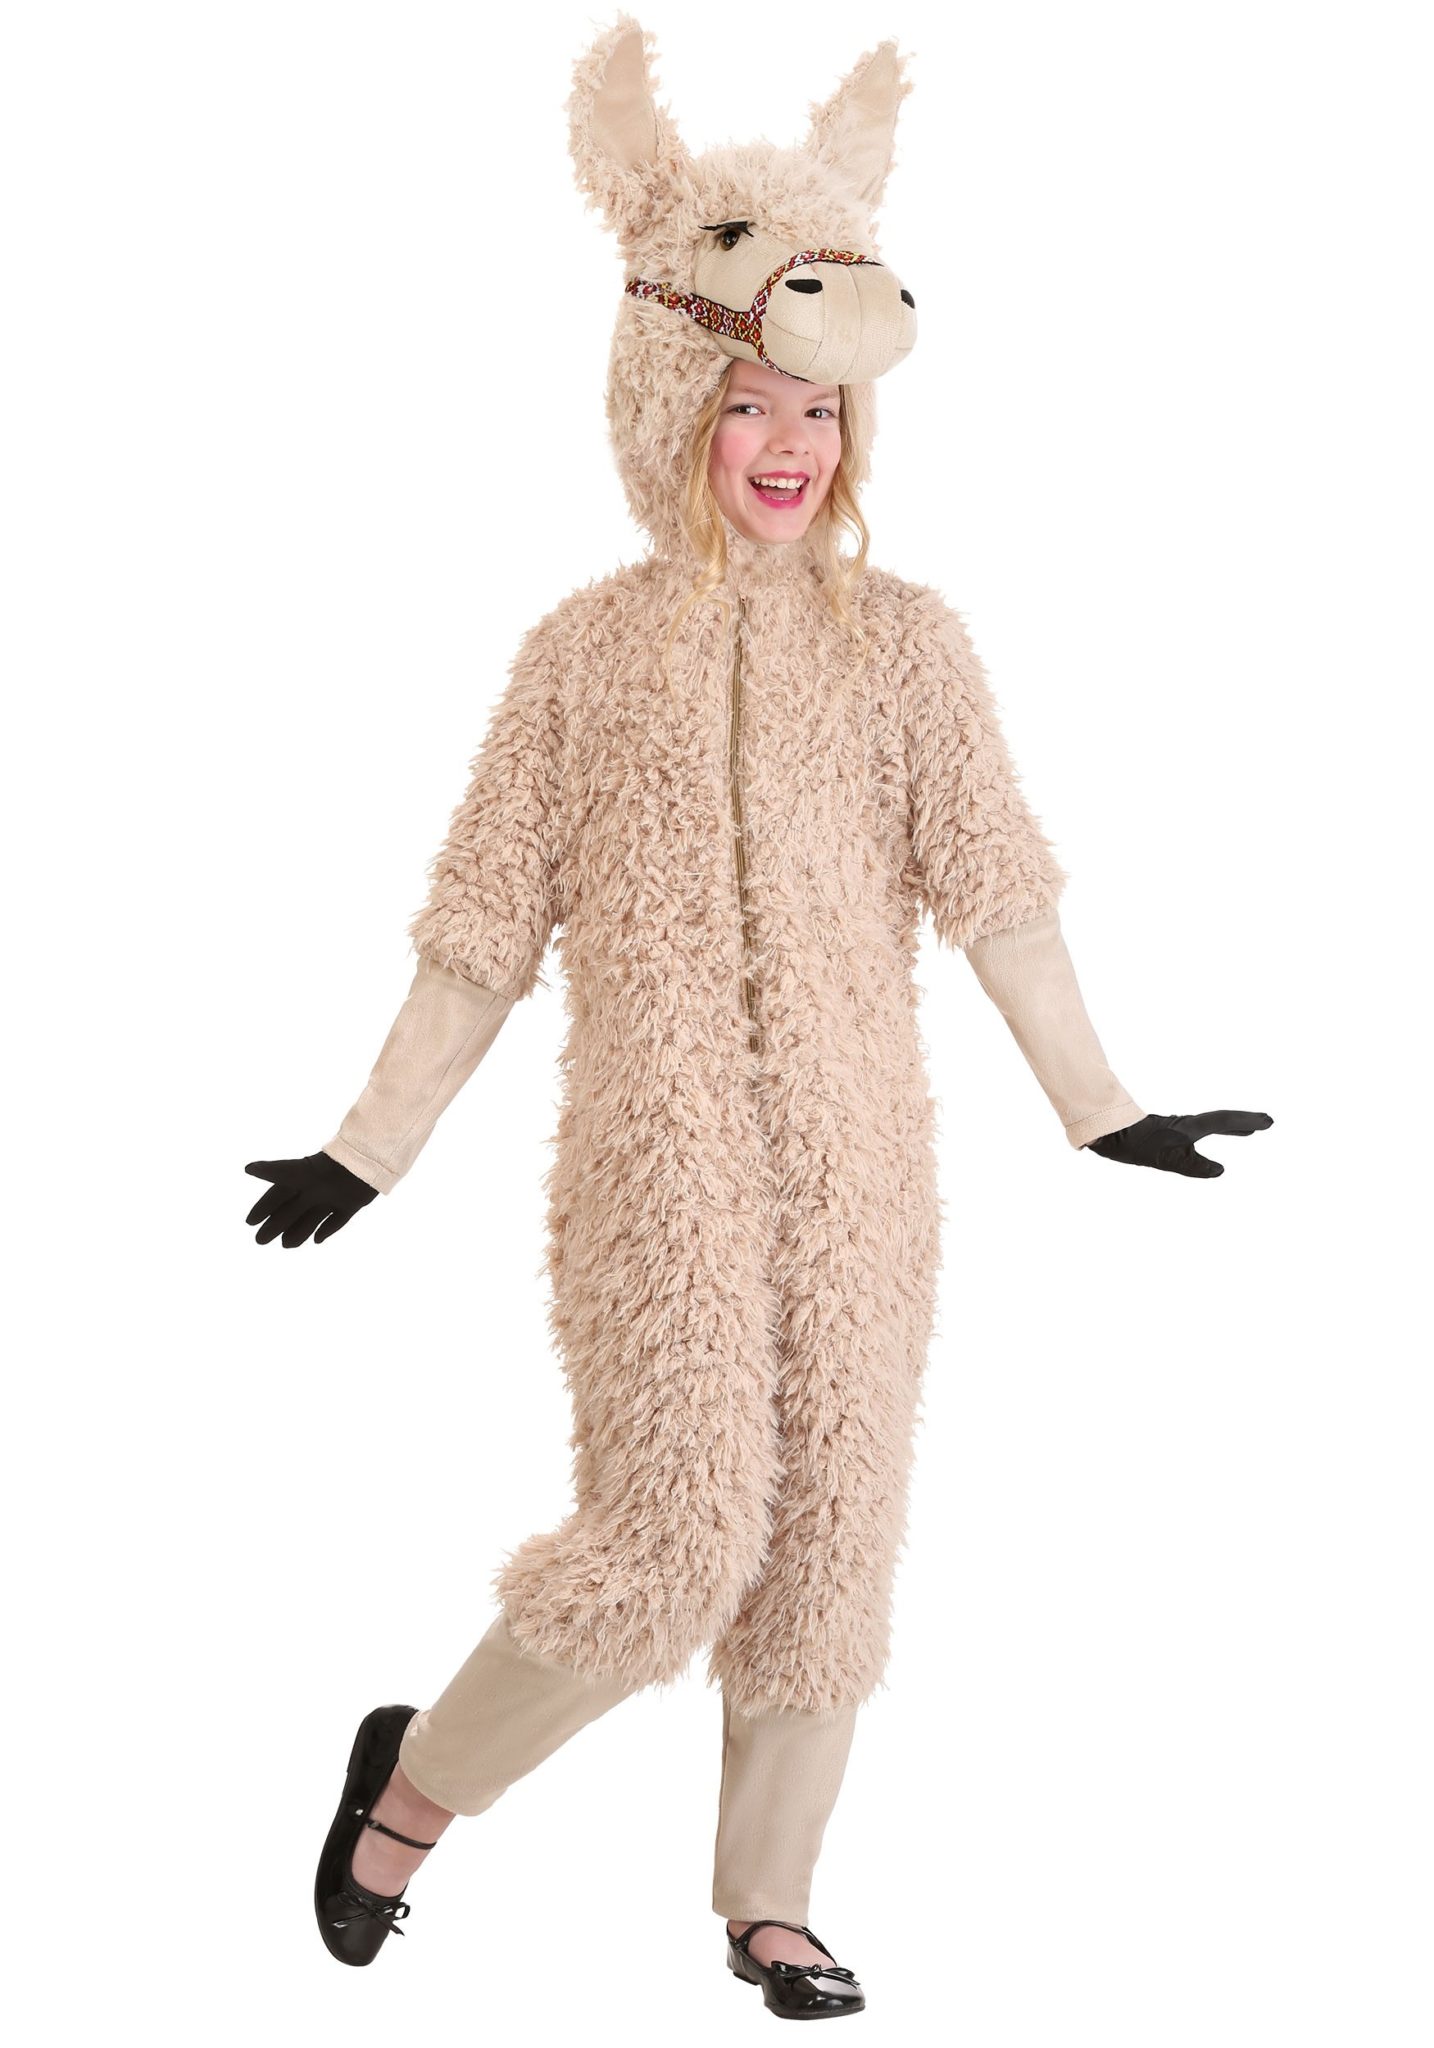 Mr Fuzzy Costume For Sale